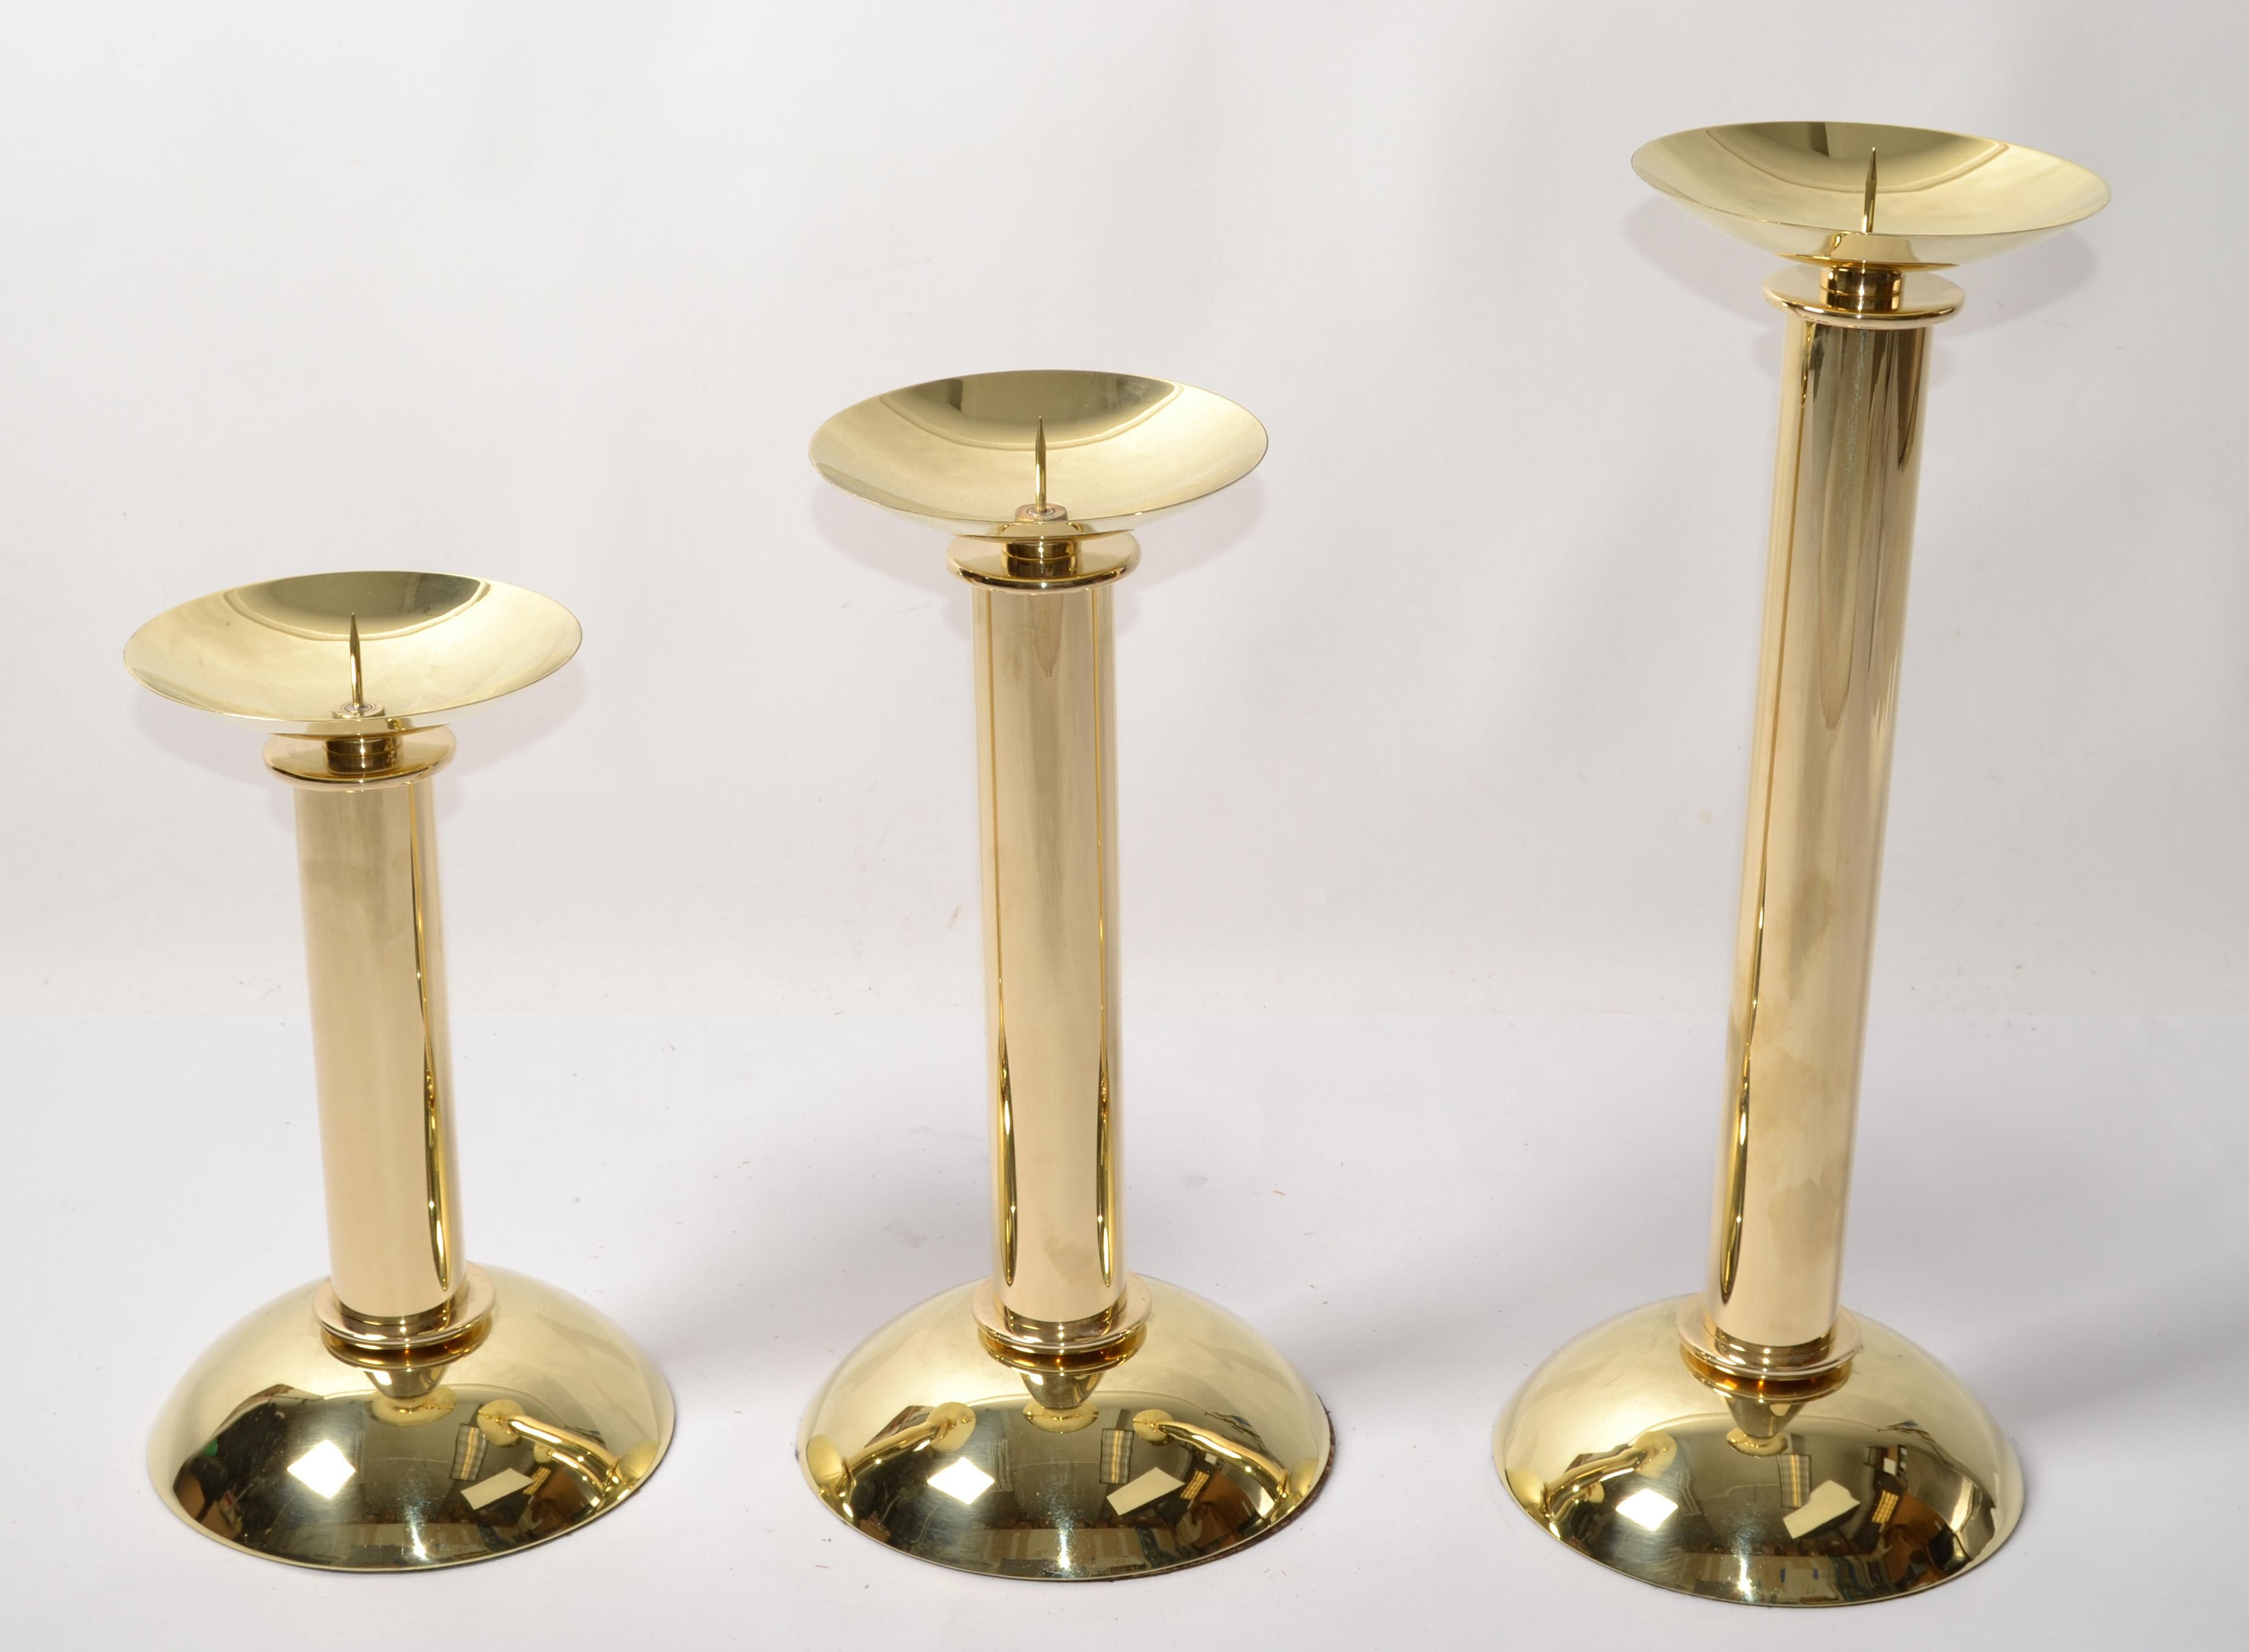 These 3 graduated Karl Springer LTD polished Brass Candlesticks are designed by Karl Springer circa 1985 in America.
Each features a concave base and a convex top connected by a cylindrical body all in lustrous brass at the base and pinnacle of the